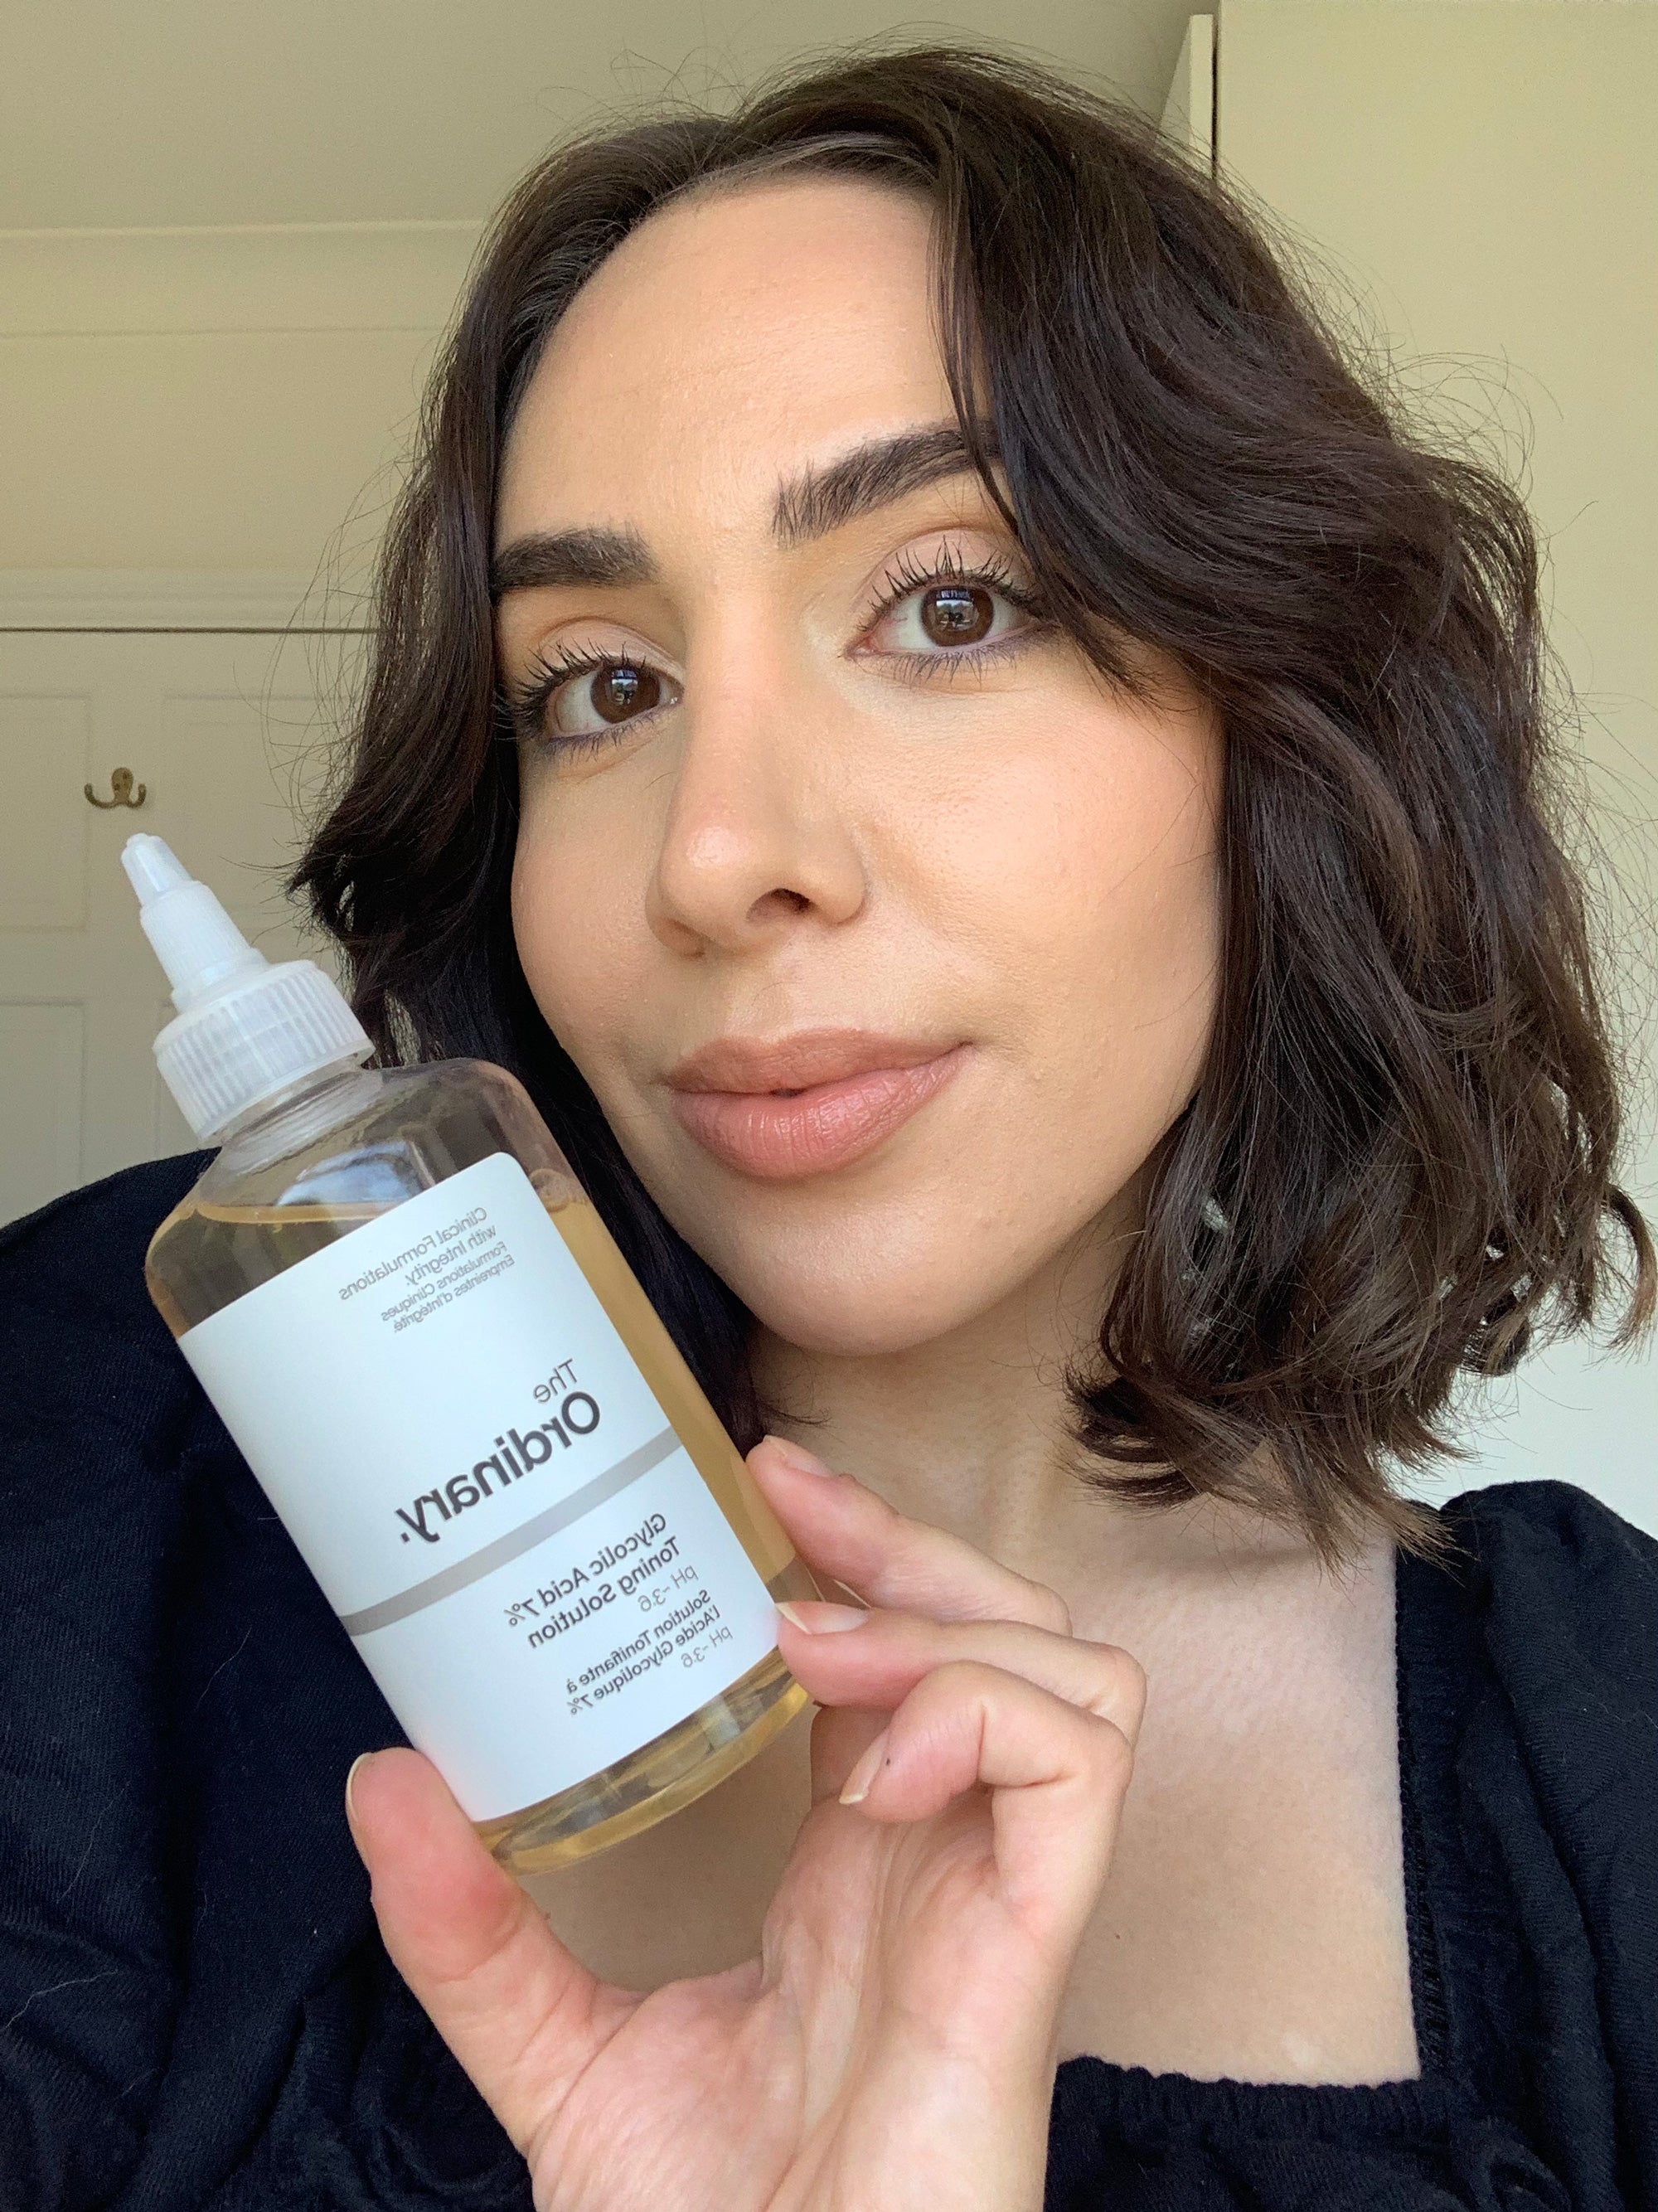 How To Take Care Of Your Baby Hairs– According To TikTok